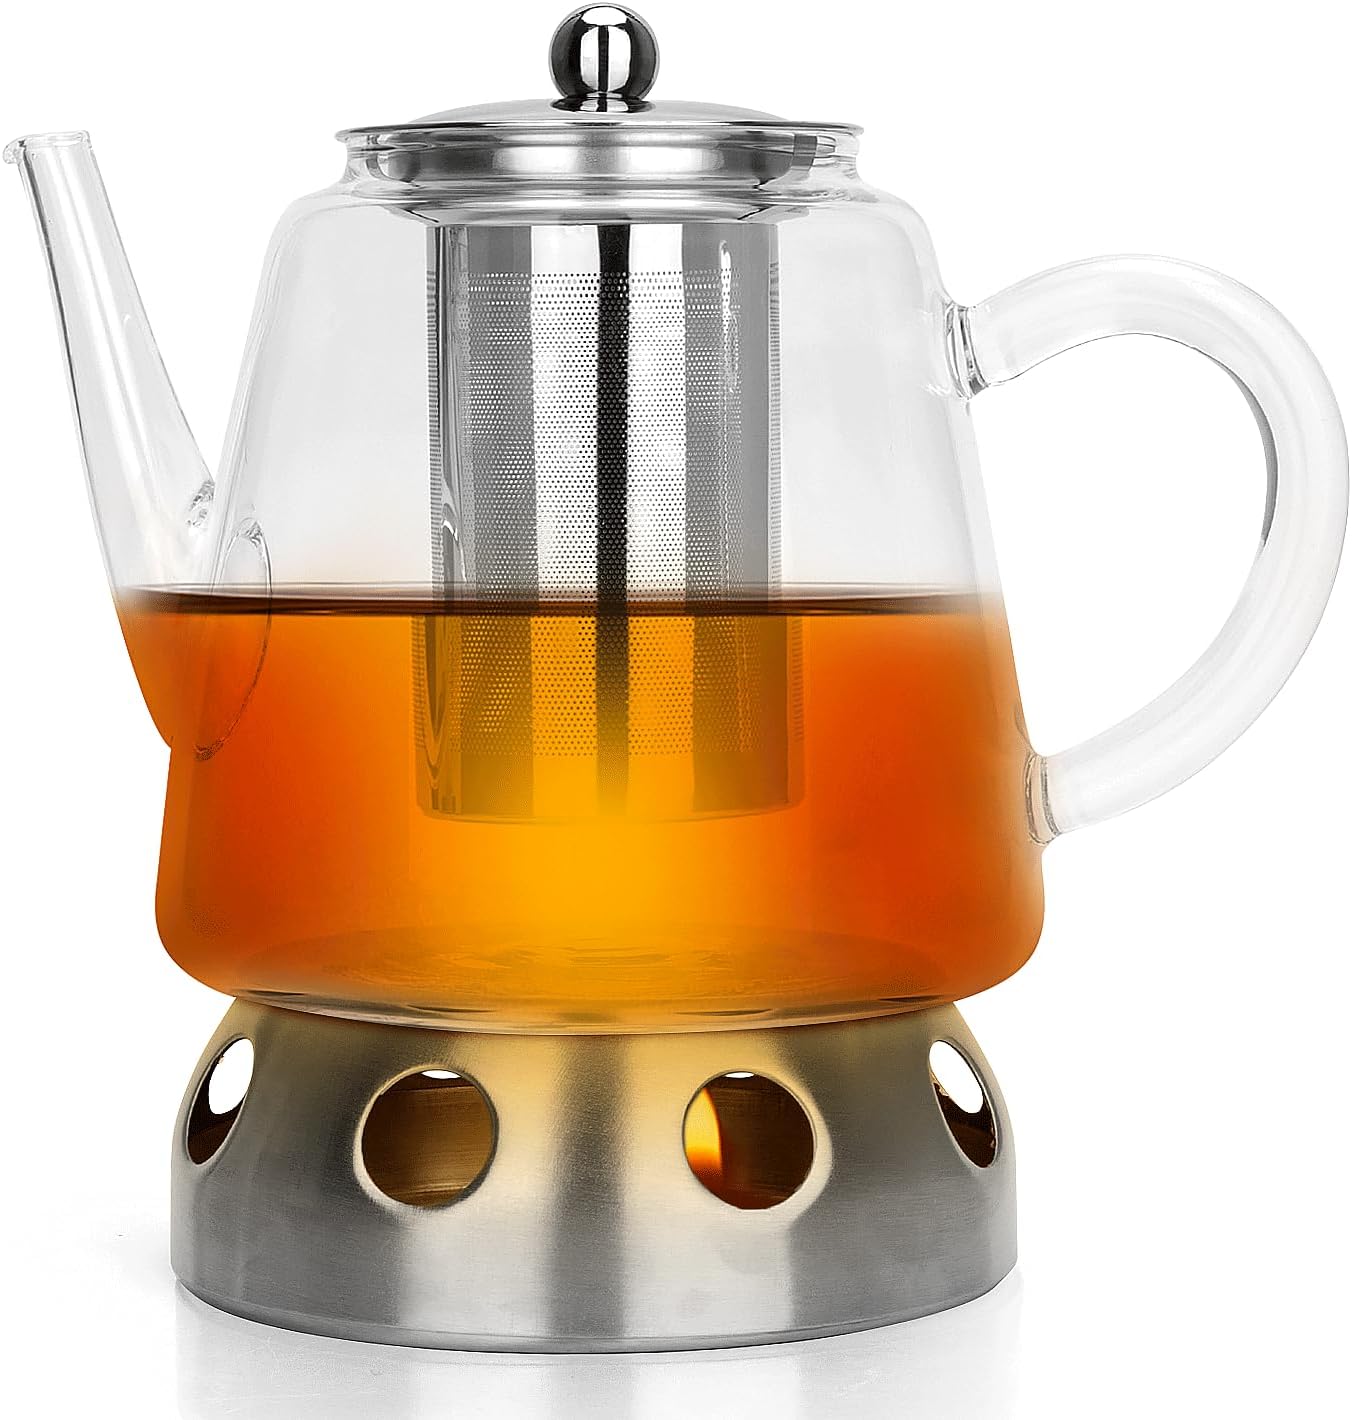 Telanks Glass Teapot 1.2 Litres, Glass Teapot with Stainless Steel Warmer and Removable Stainless Steel Strainer Insert, Glass Teapot for Loose Tea and Tea Bags